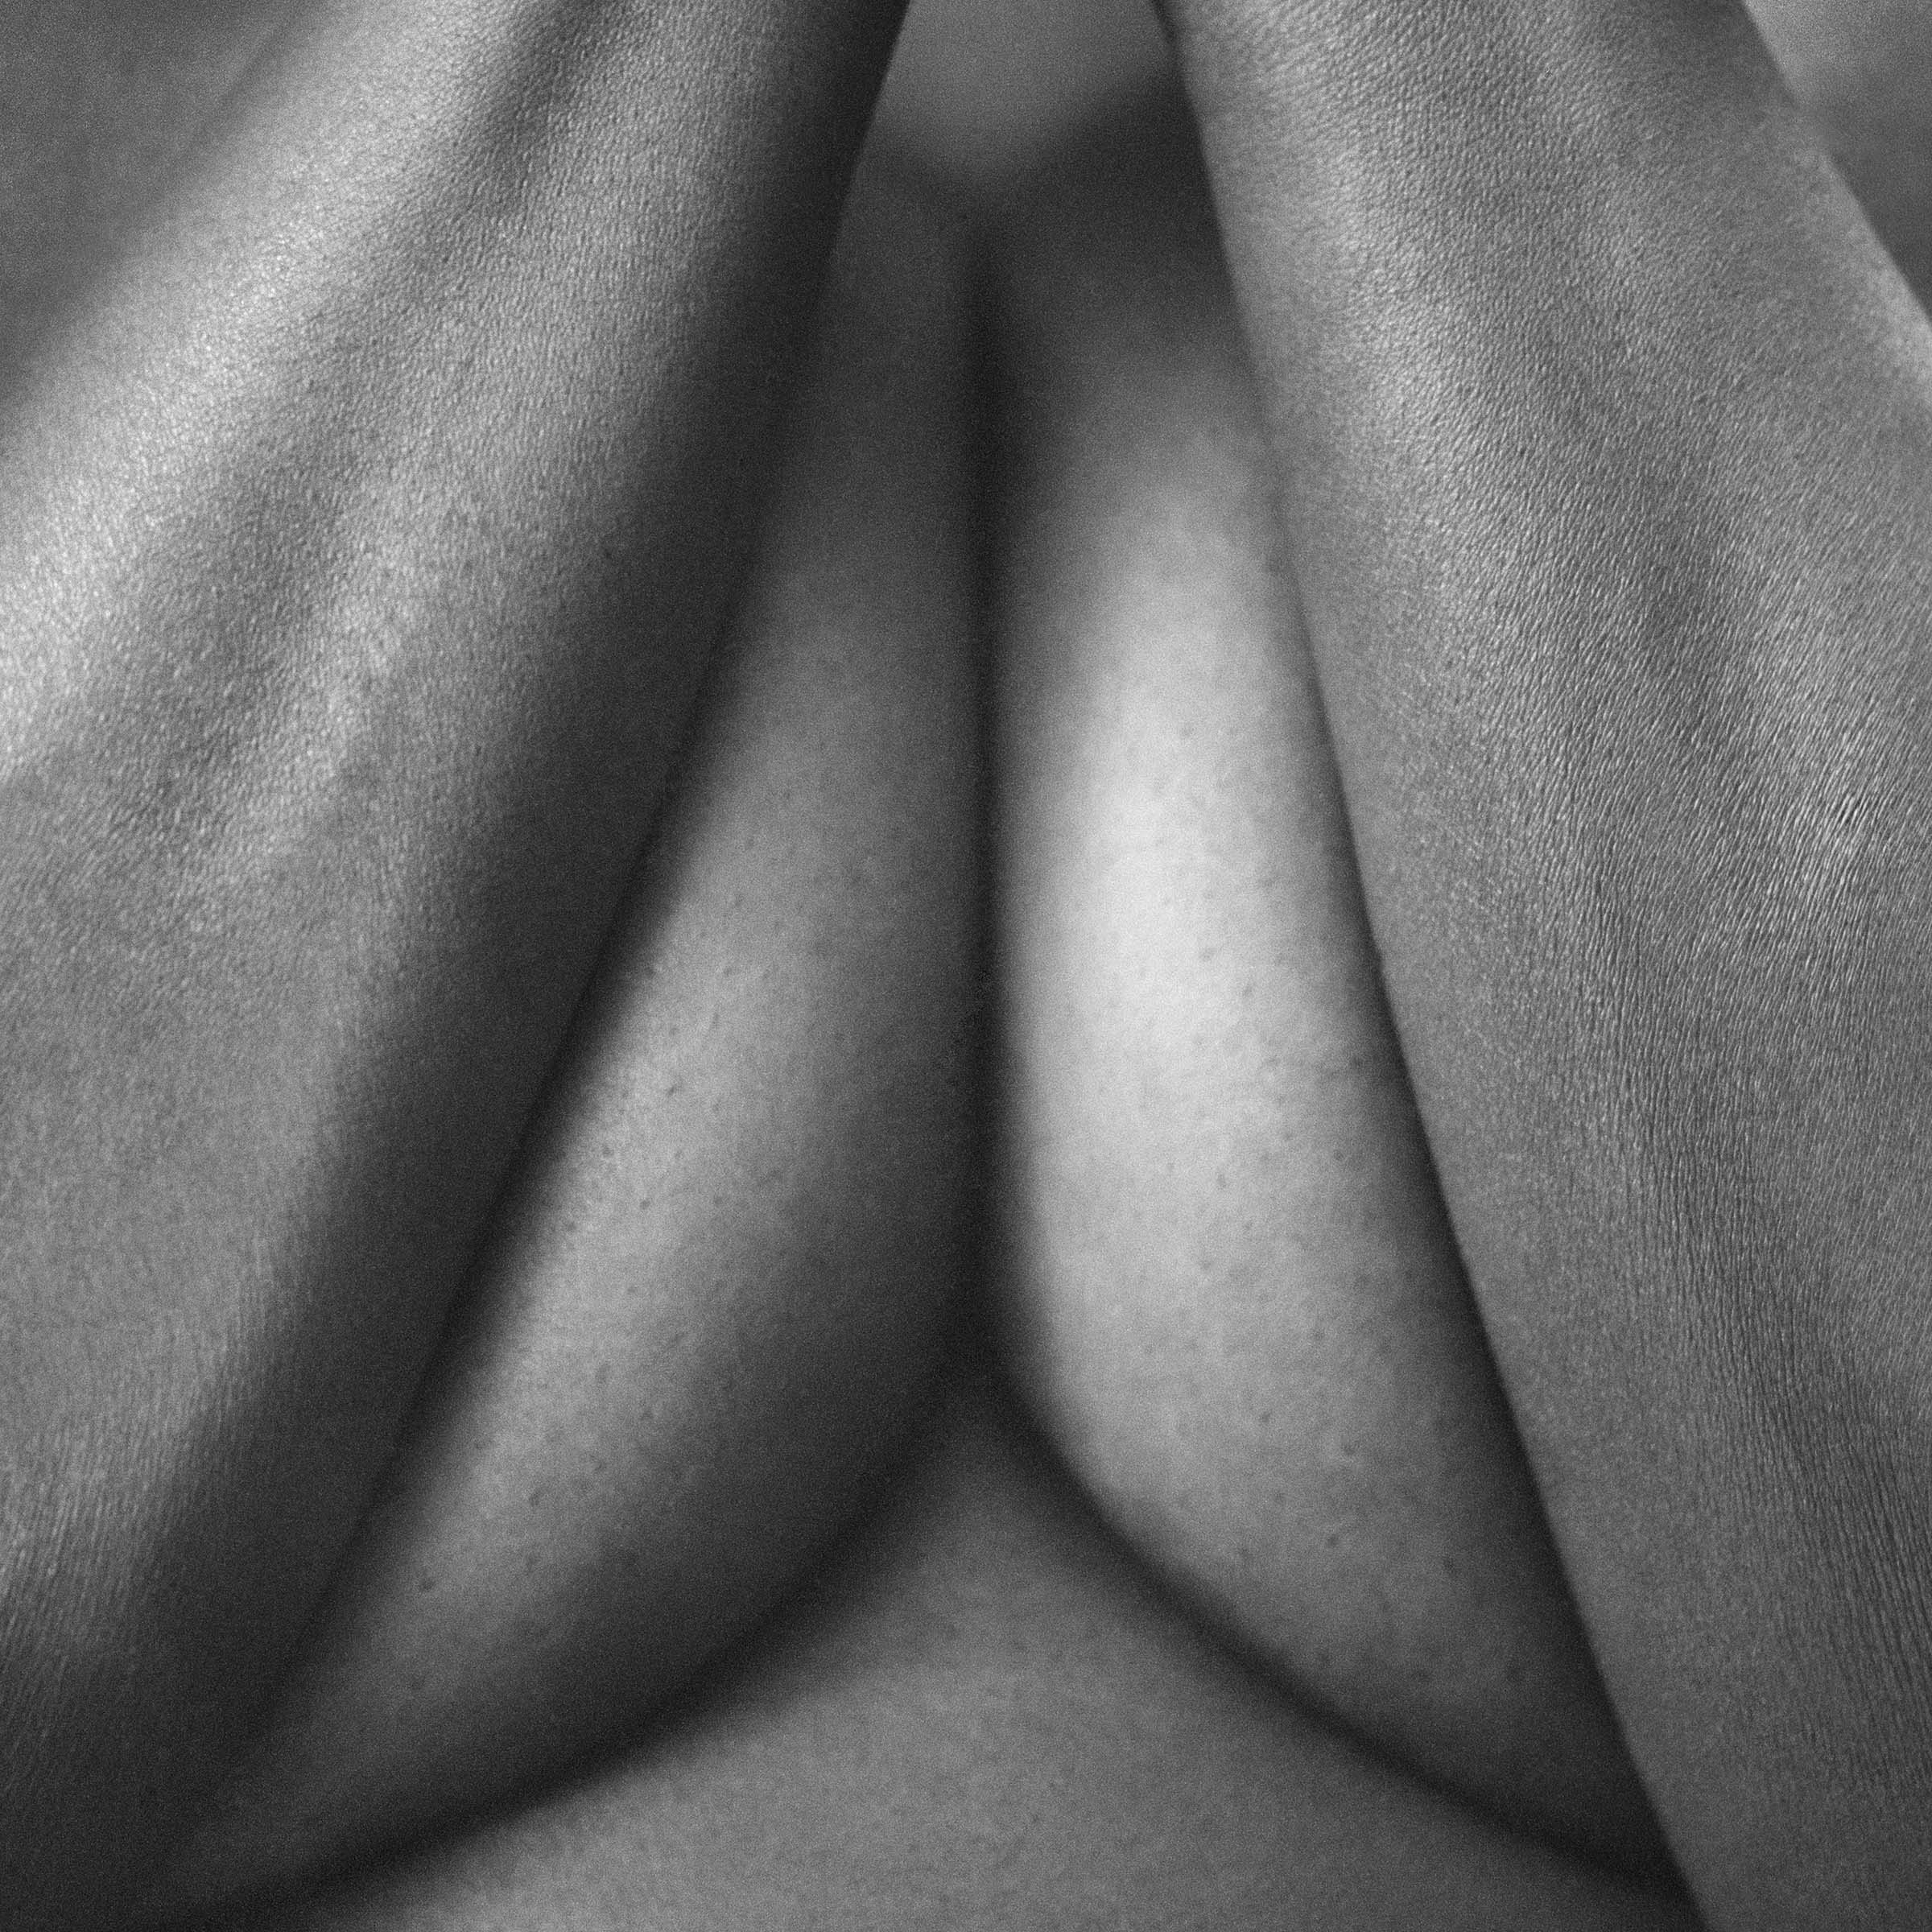 Squeezed Breasts